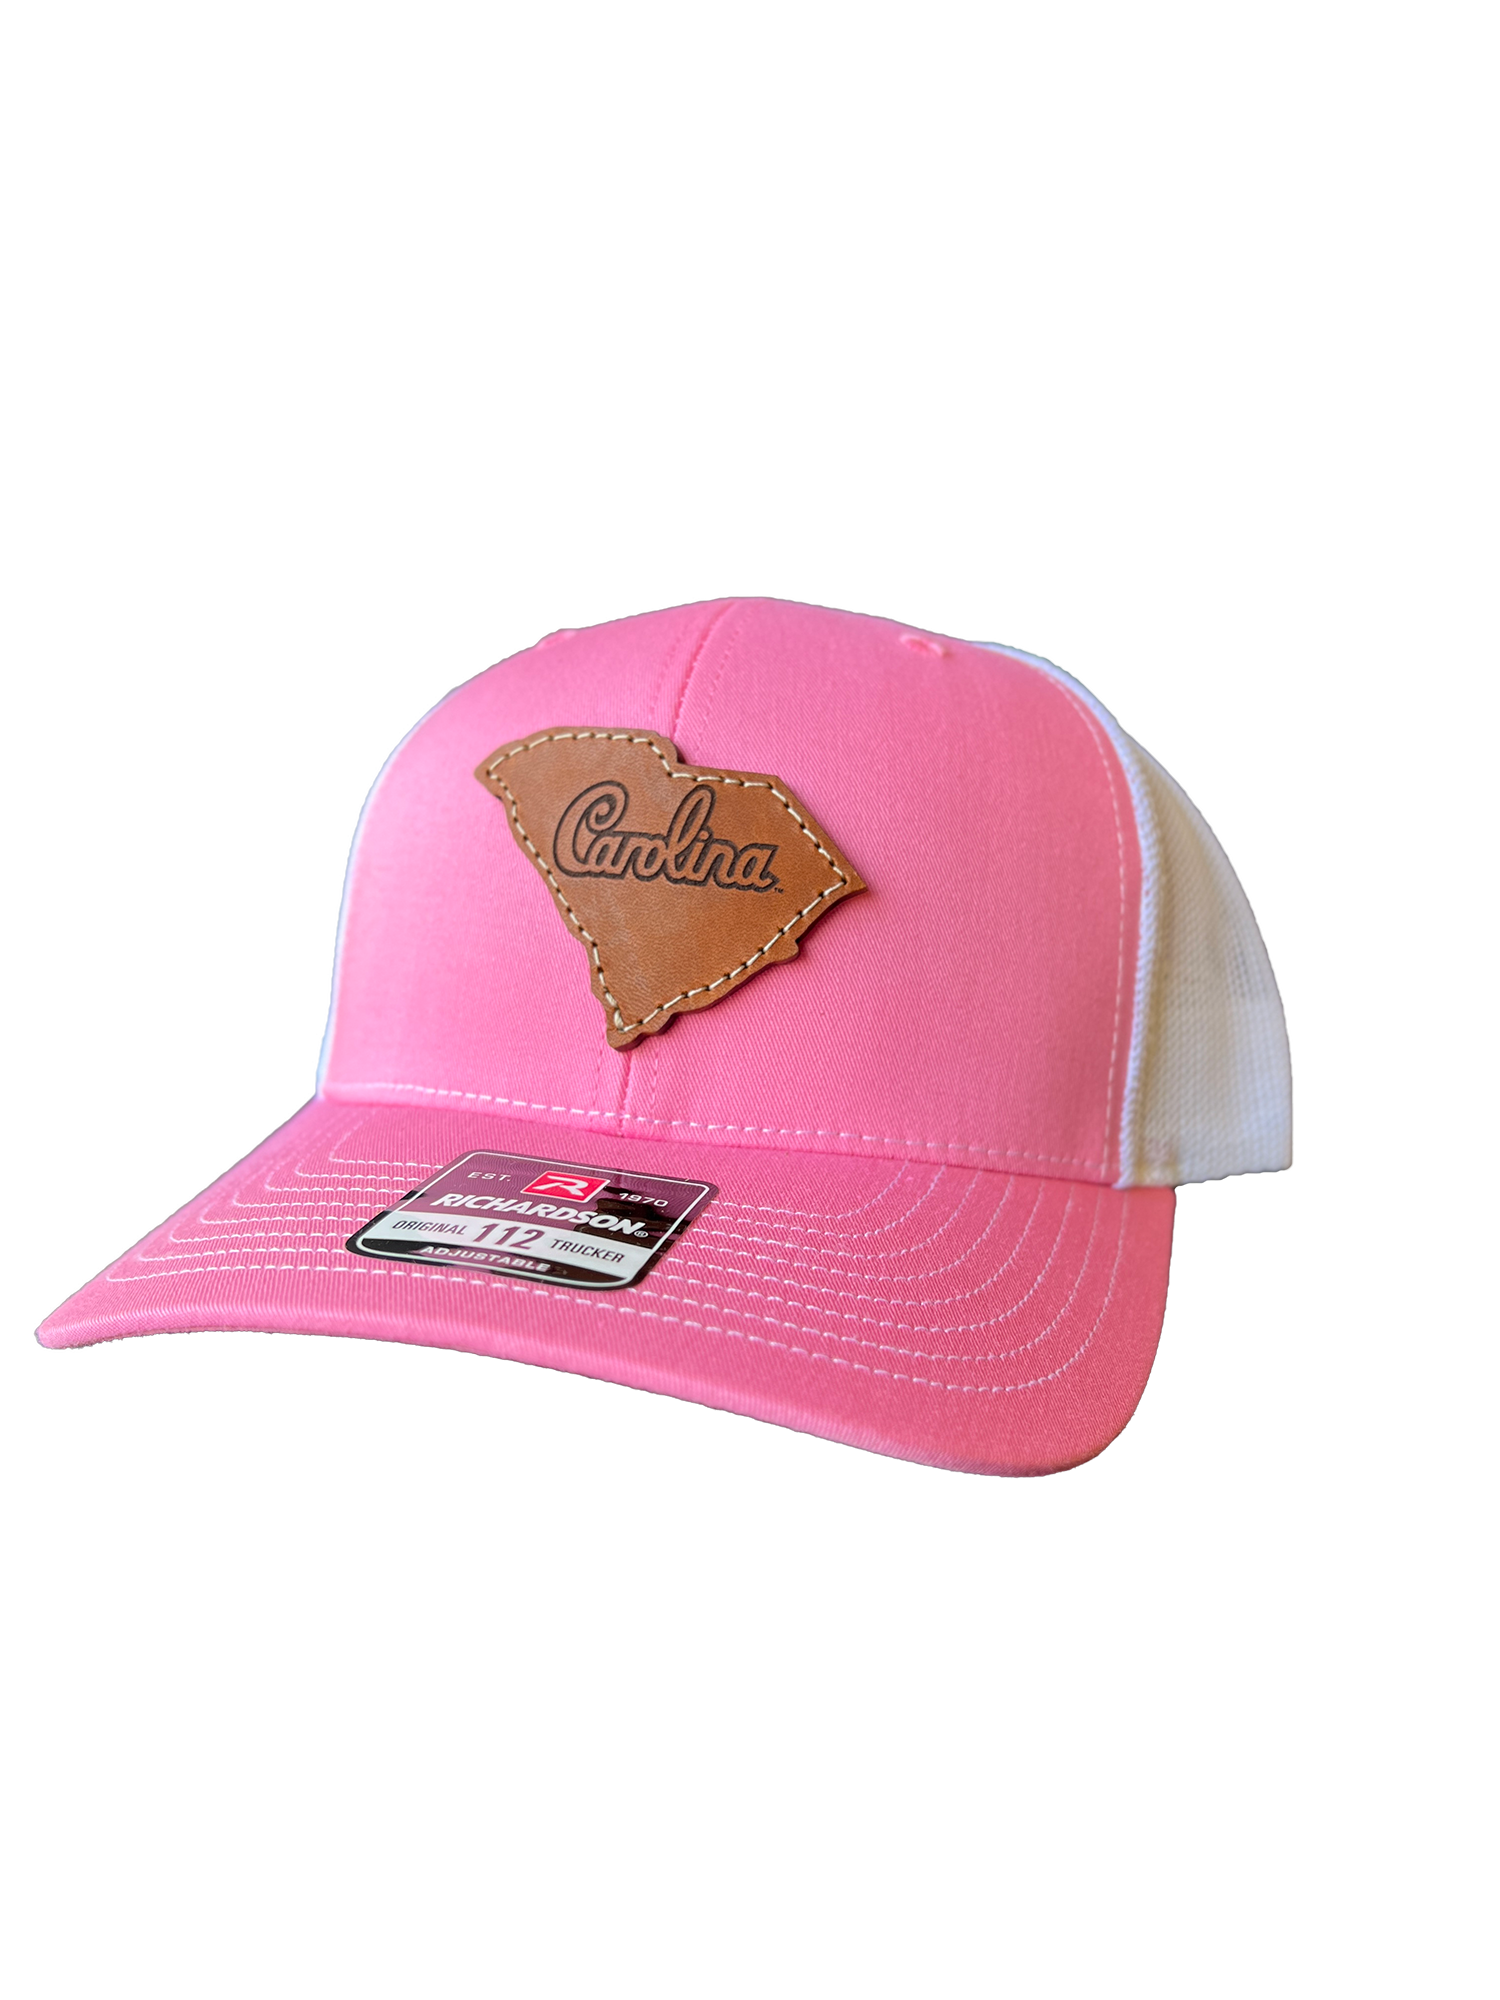 South Carolina Gamecocks Leather Patch Trucker Hat (State Script)